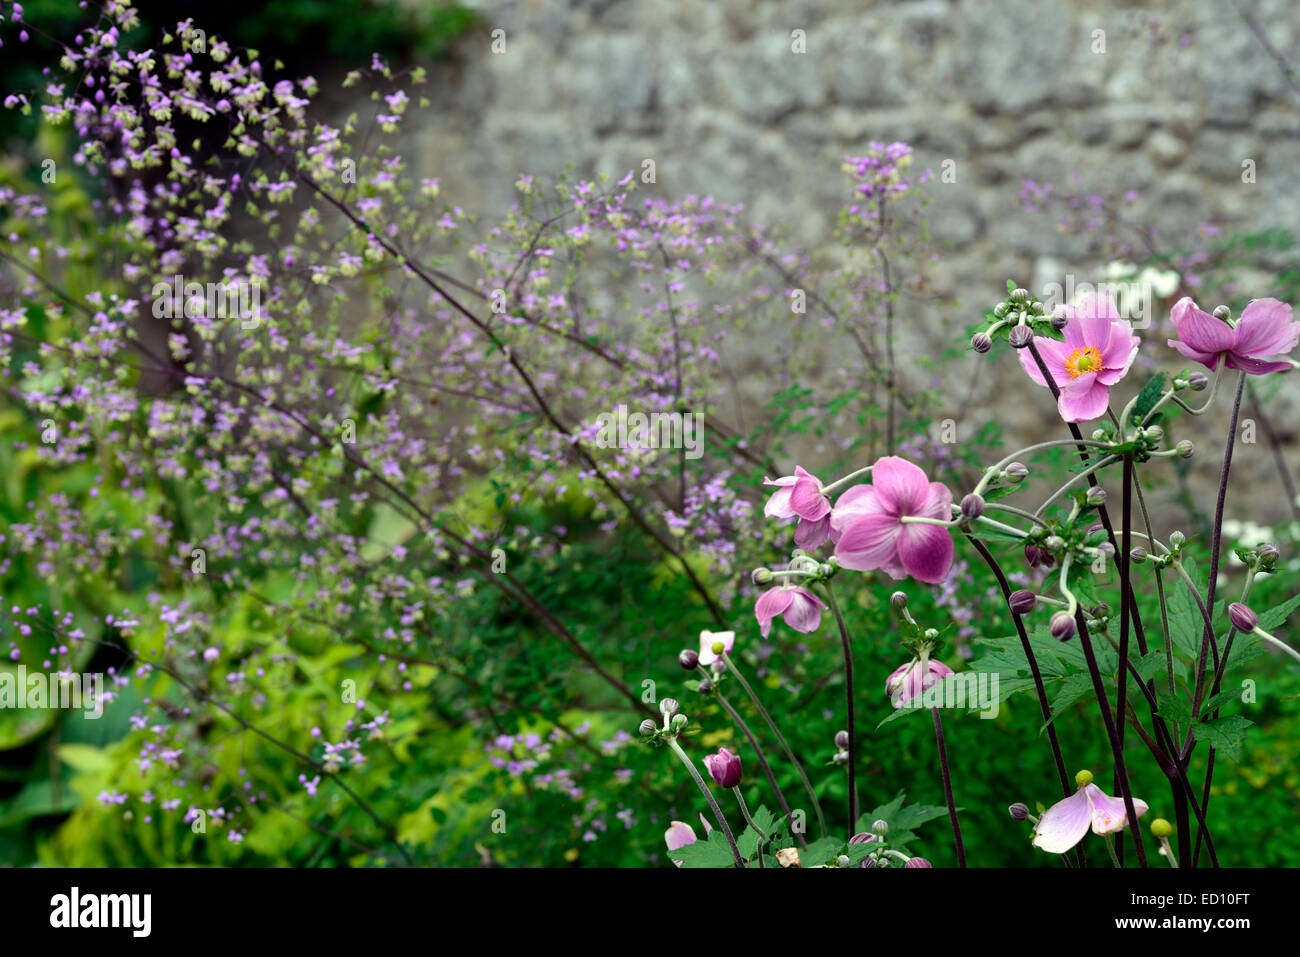 thalictrum delavayi Anemone hupehensis Praecox mixed herbaceous perennial border walled garden pink purple flowers RM Floral Stock Photo